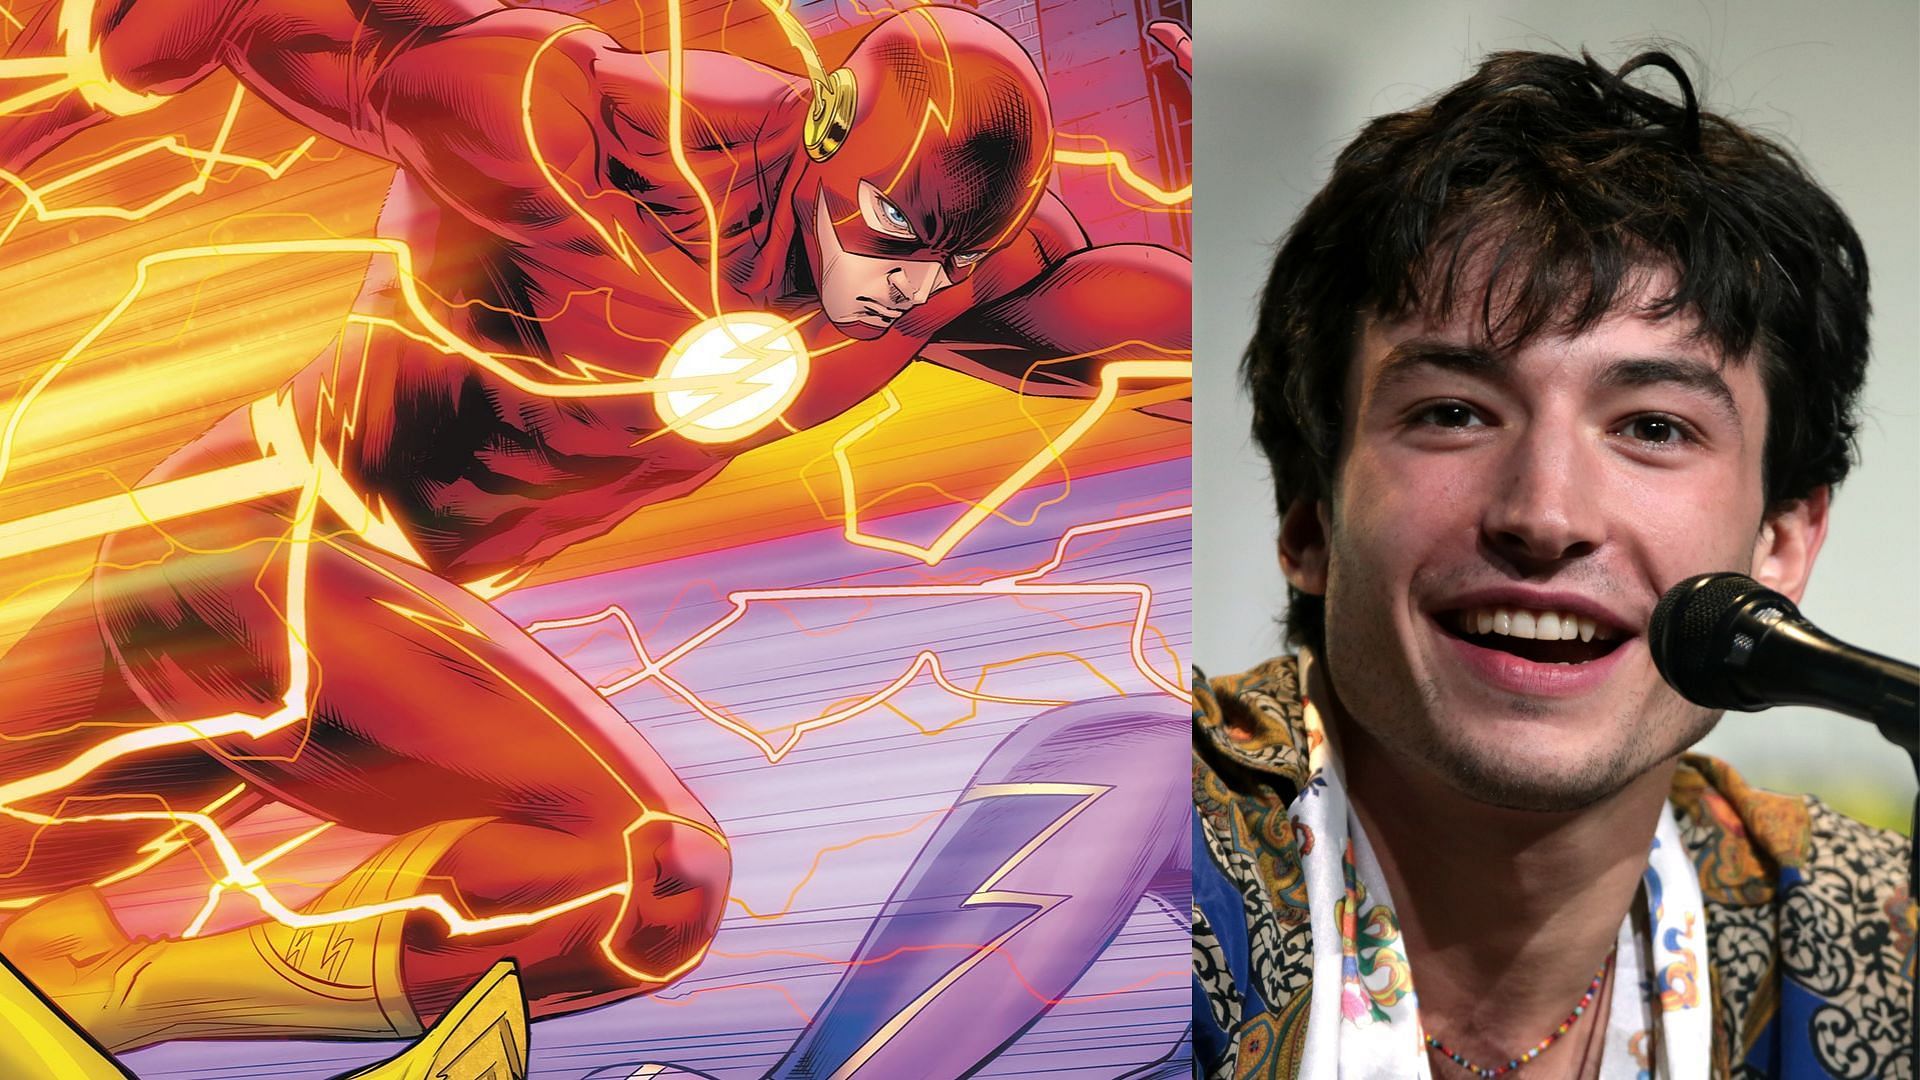 Ezra Miller plays the superhero Flash in DC movies (Image via DC and Wikipedia)